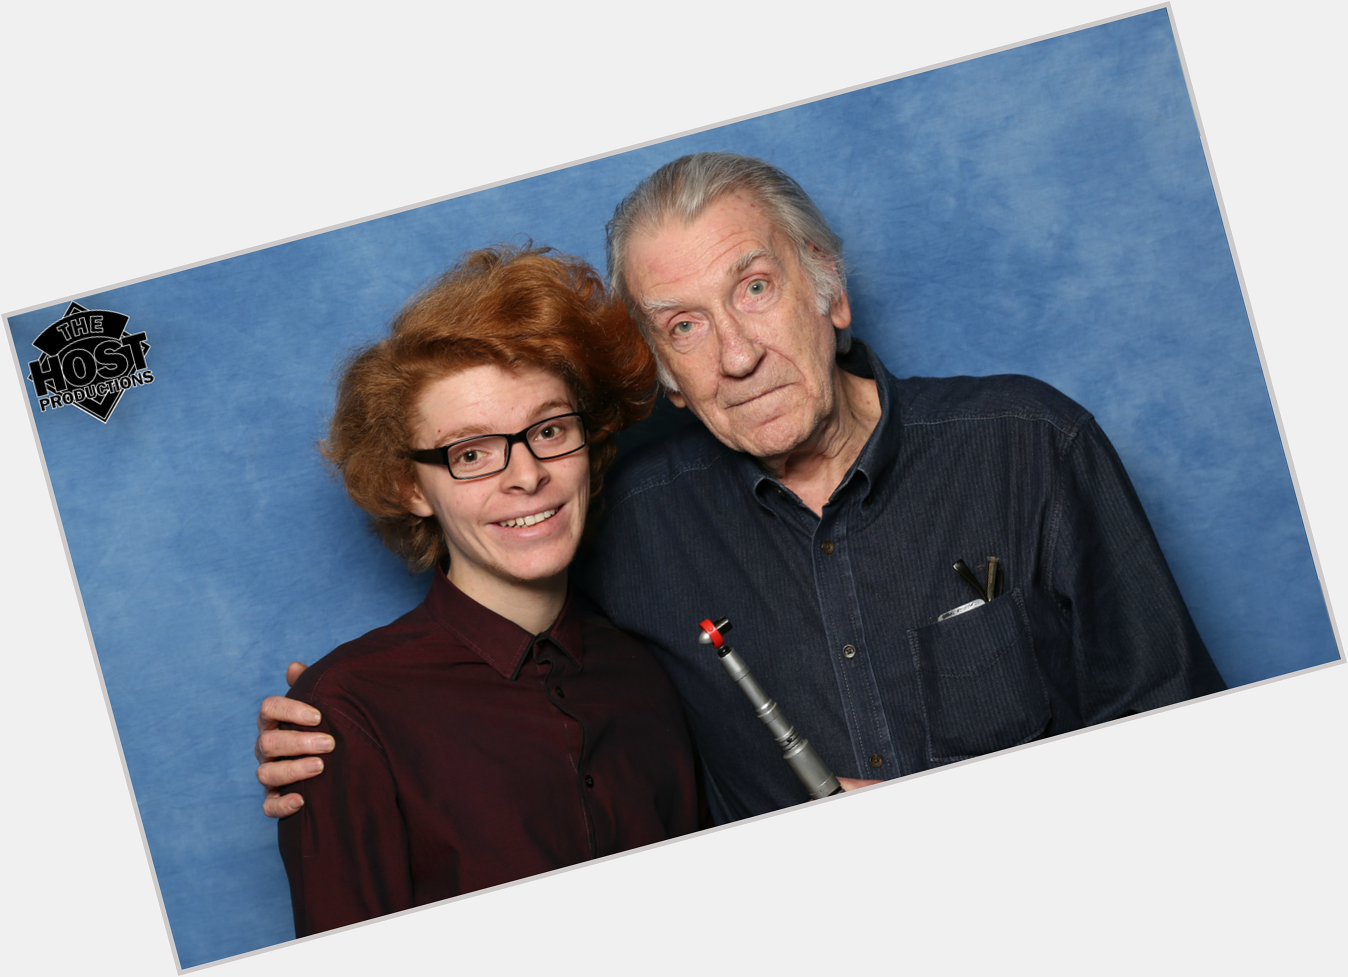 Happy Birthday to David Warner! The unbound doctor himself, he was so lovely when i met him a few years ago 